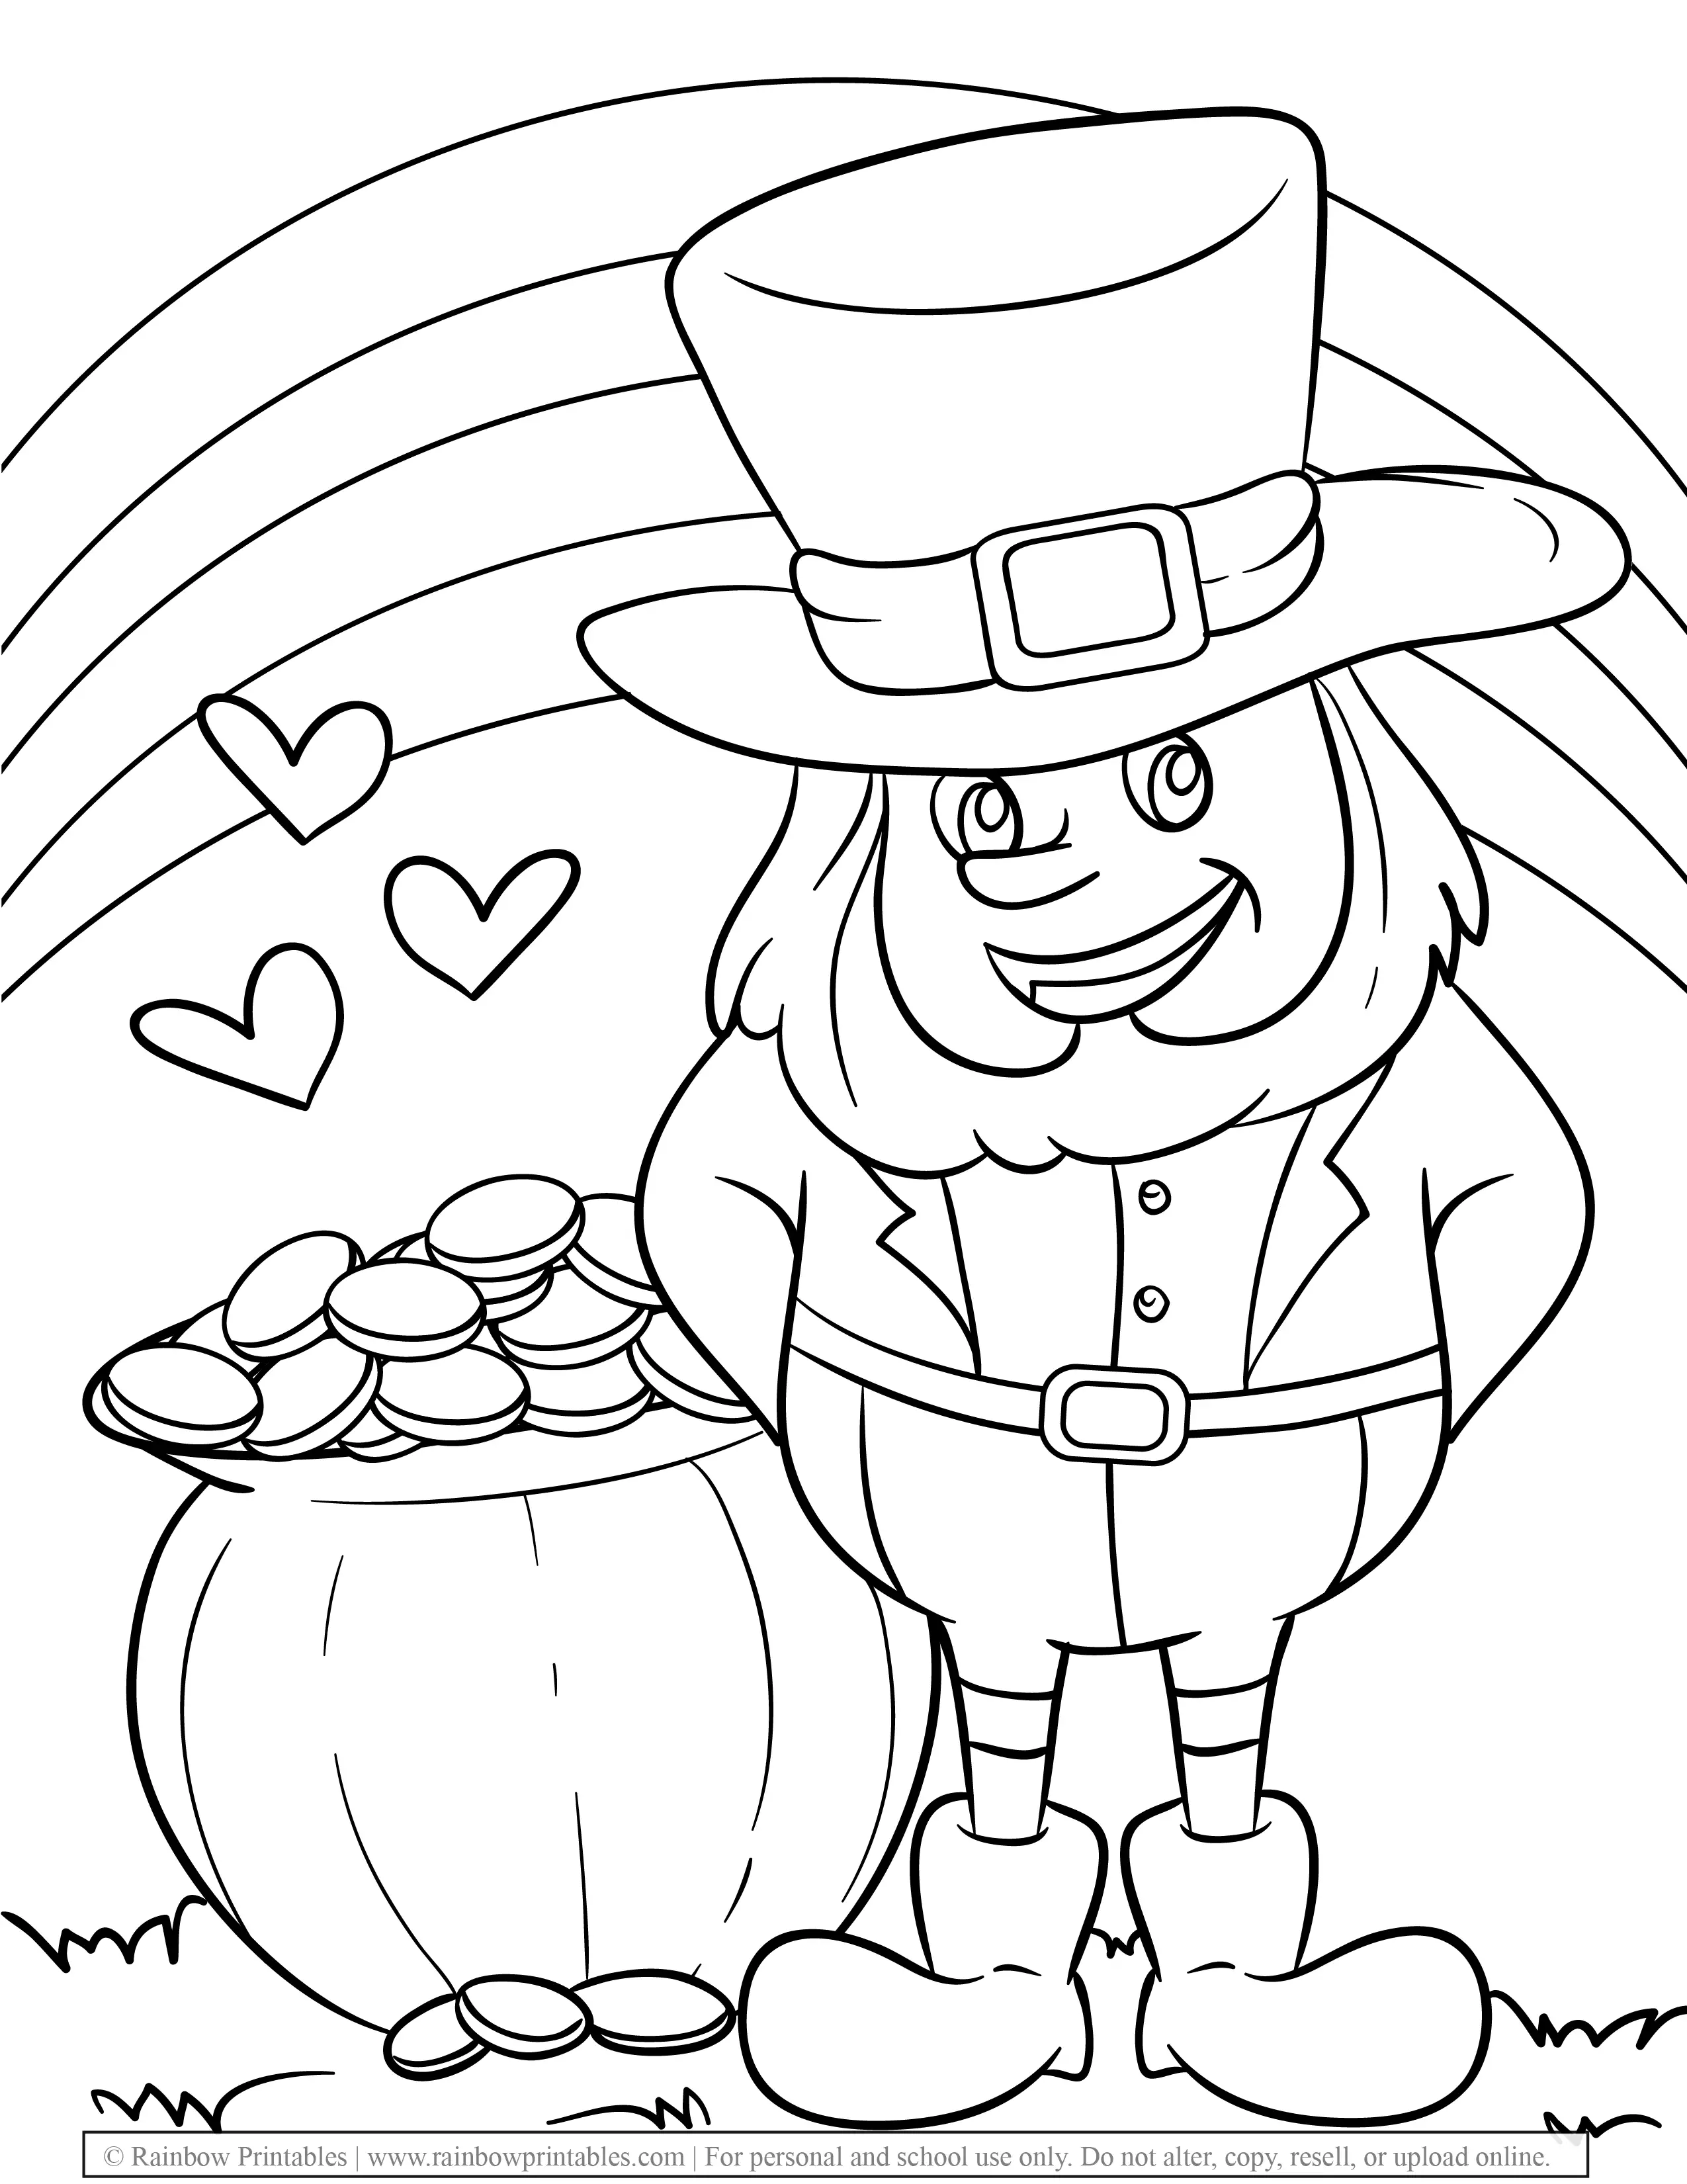 Free Coloring Pages for Kids Drawing Activities Line Art Illustration Leprechaun Pot of Gold Lucky 4 Clover Leaf St Patrick's Day RAINBOW